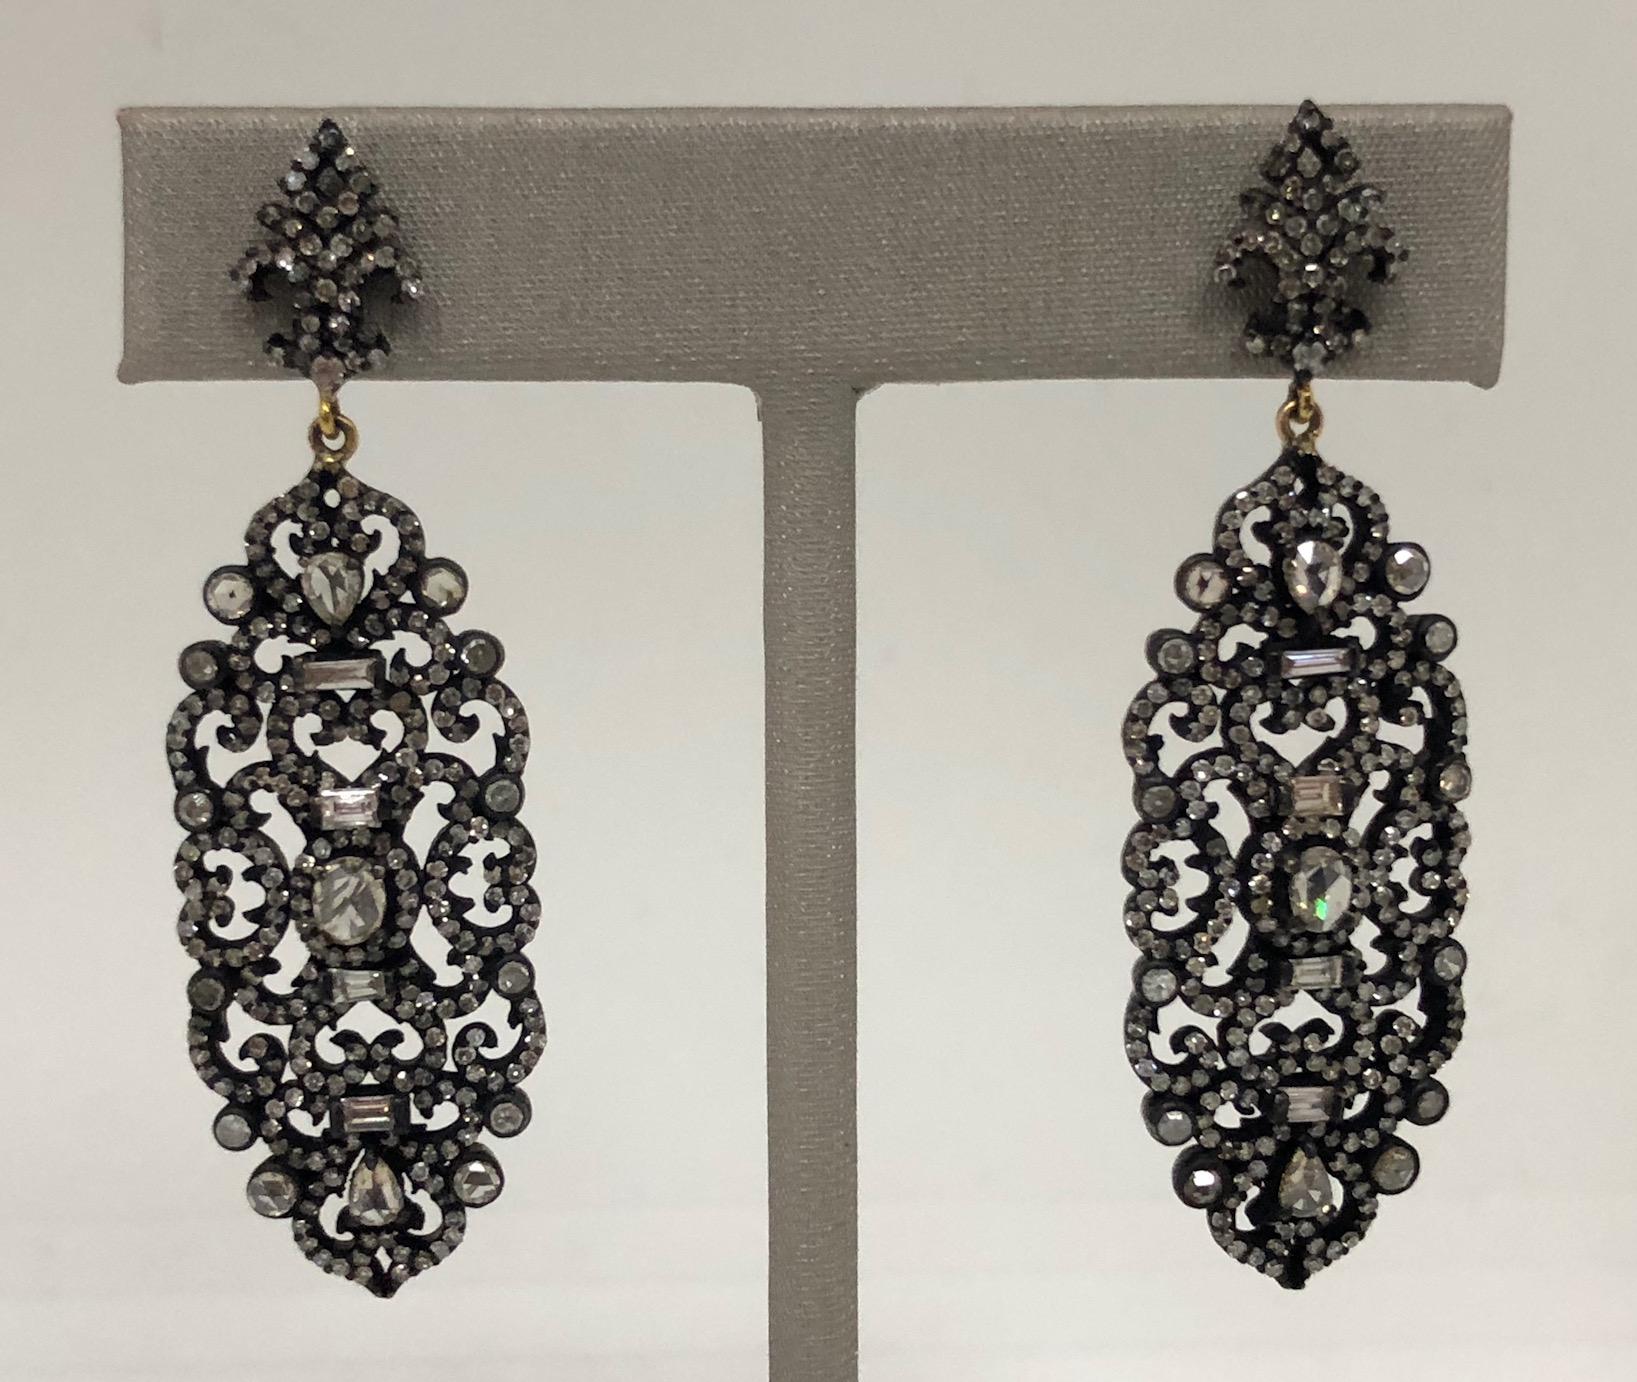 The blackened gold pendant style earrings are set with rustic, light brown, included, single, baguette and rose cut diamonds; the top is formed in the figure of a diamond set flour-de-lis, with ornate curved and swirled damask-style patterned